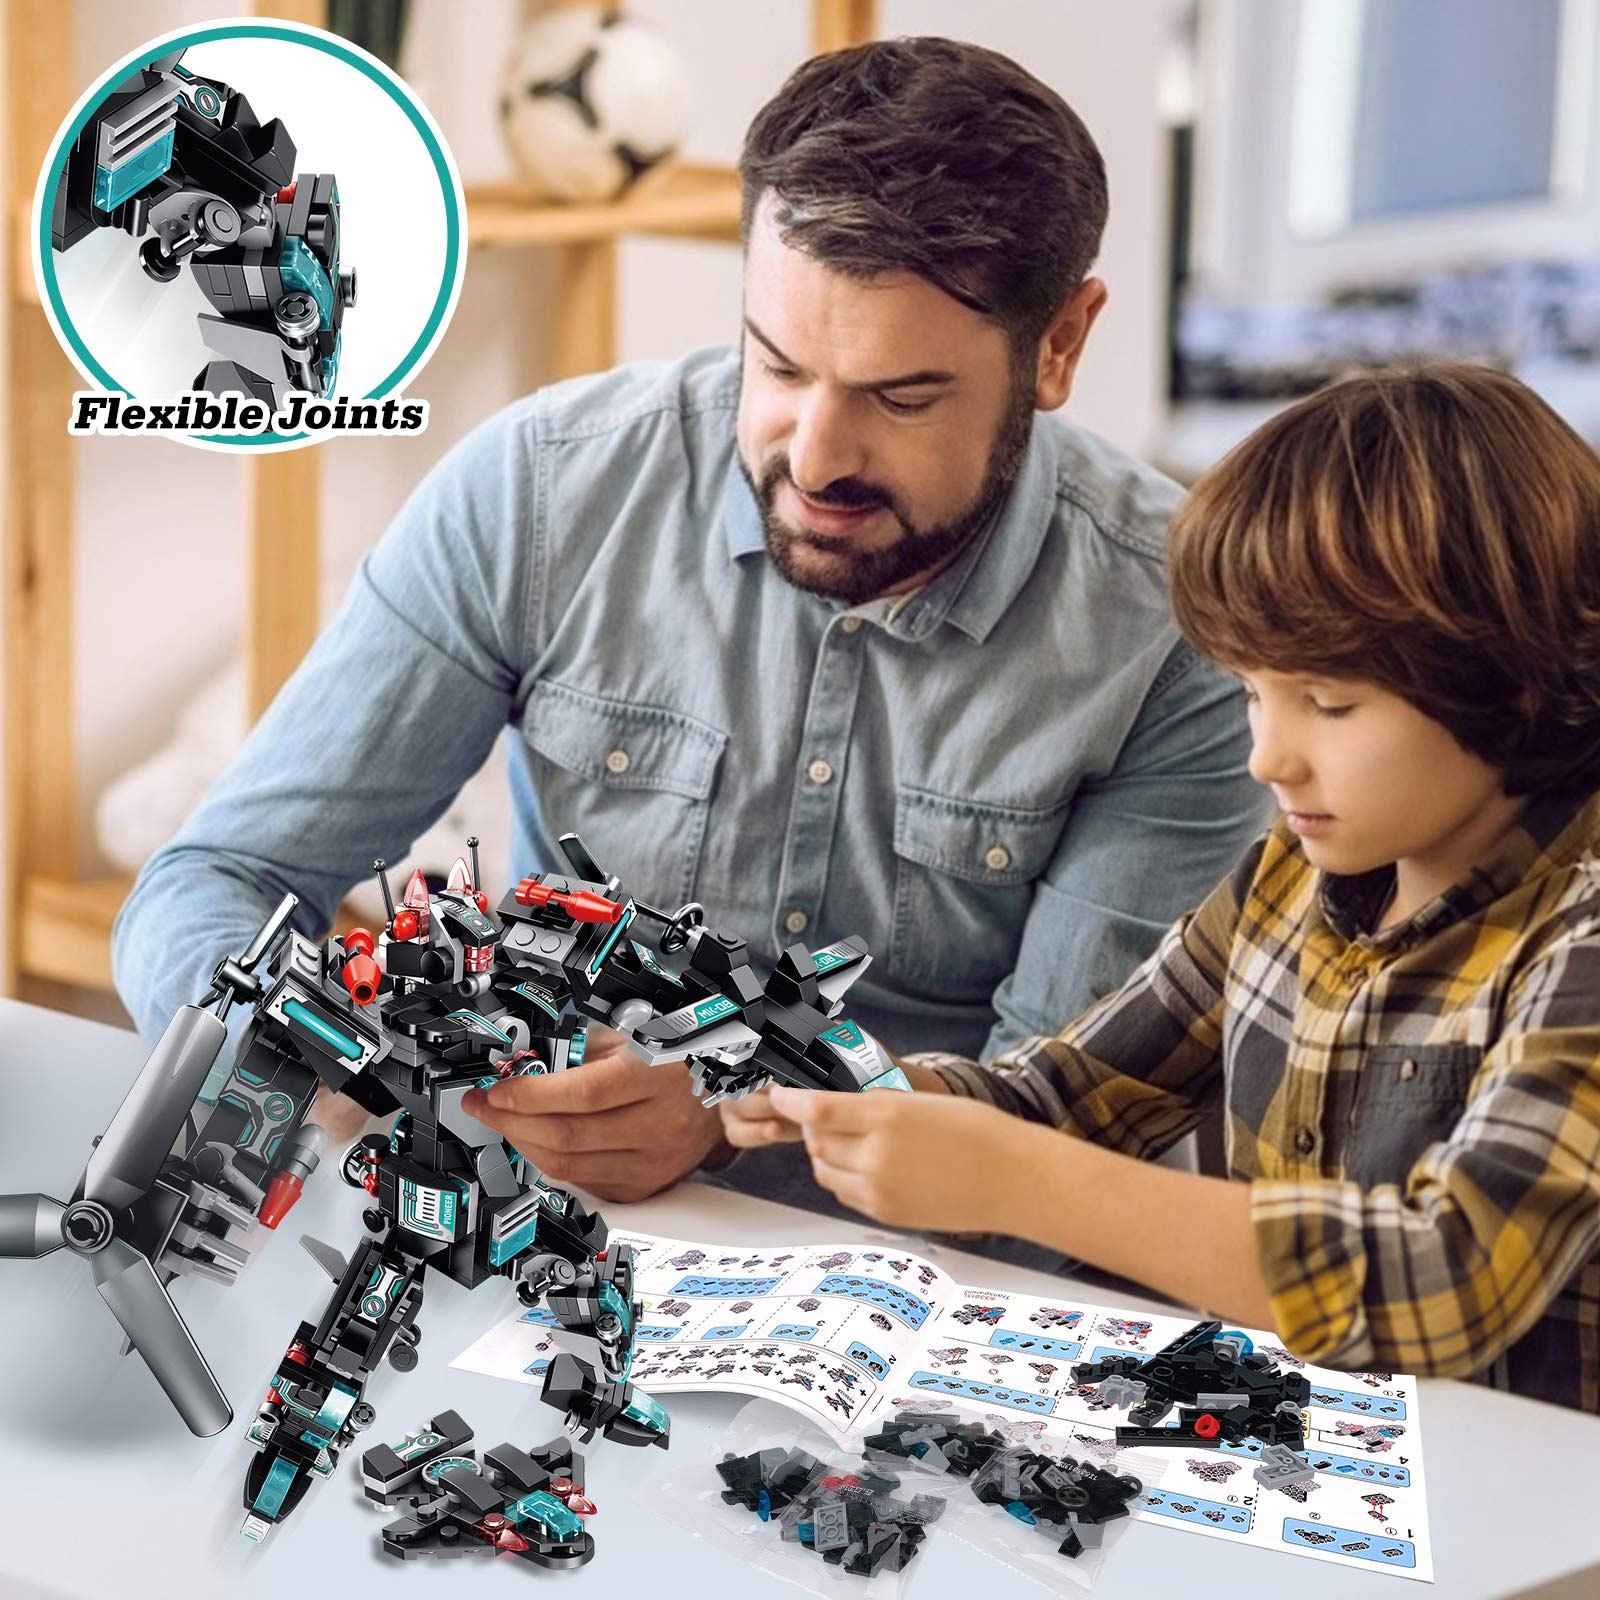 Qlt QIAOLETONG Qlt Stem Robot Building Toys for Boys Age 8-12,908 Pcs 12-in-1 Transformation Ninja Mech Warrior Vehicles Kit Building Block Best Gifts